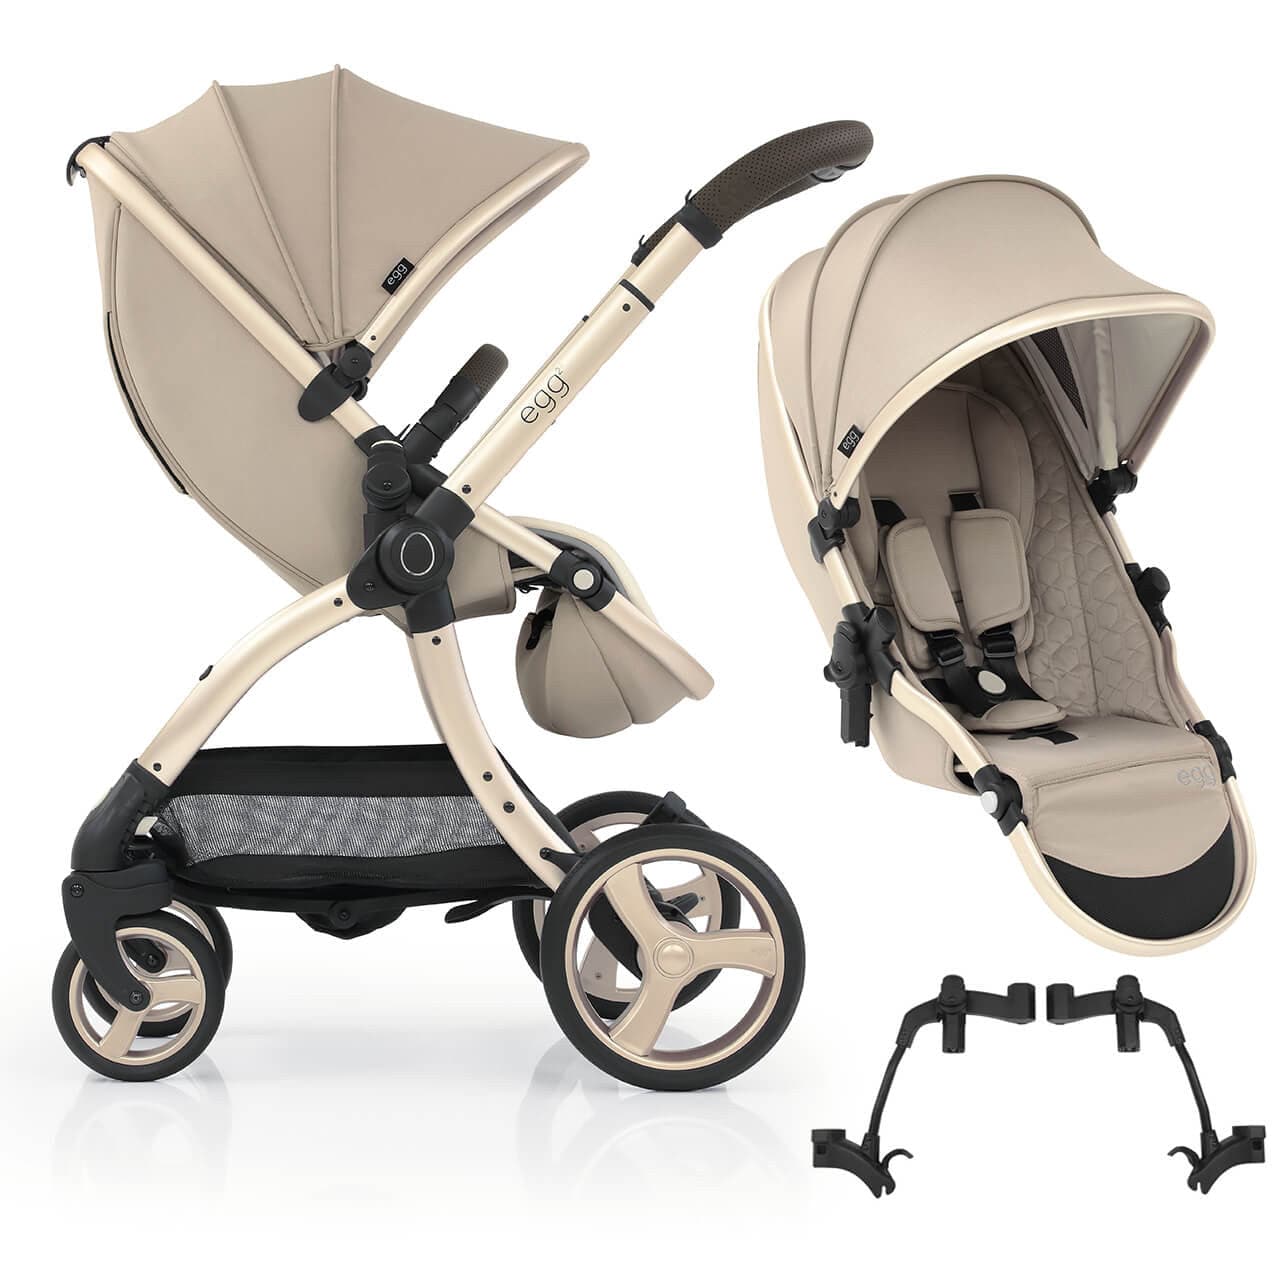 Egg® 2 Tandem Stroller - Feather - For Your Little One